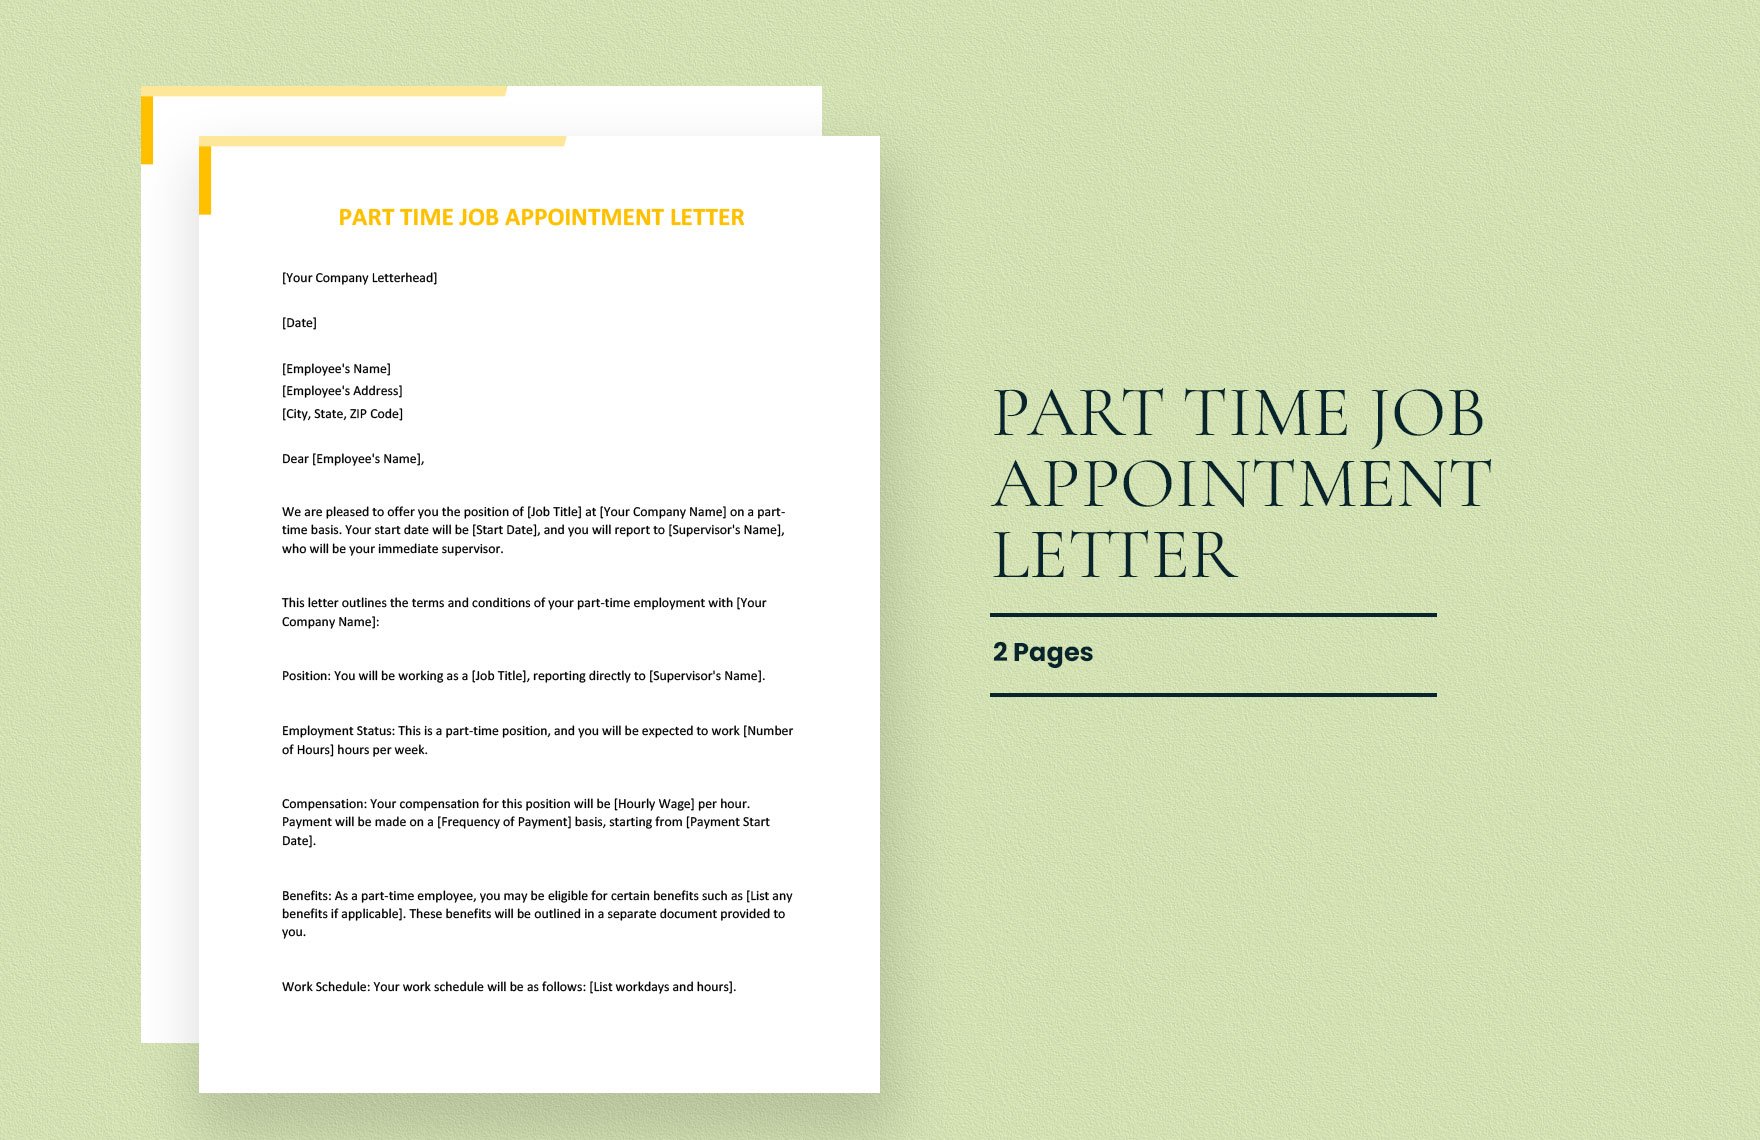 Part Time Job Appointment Letter